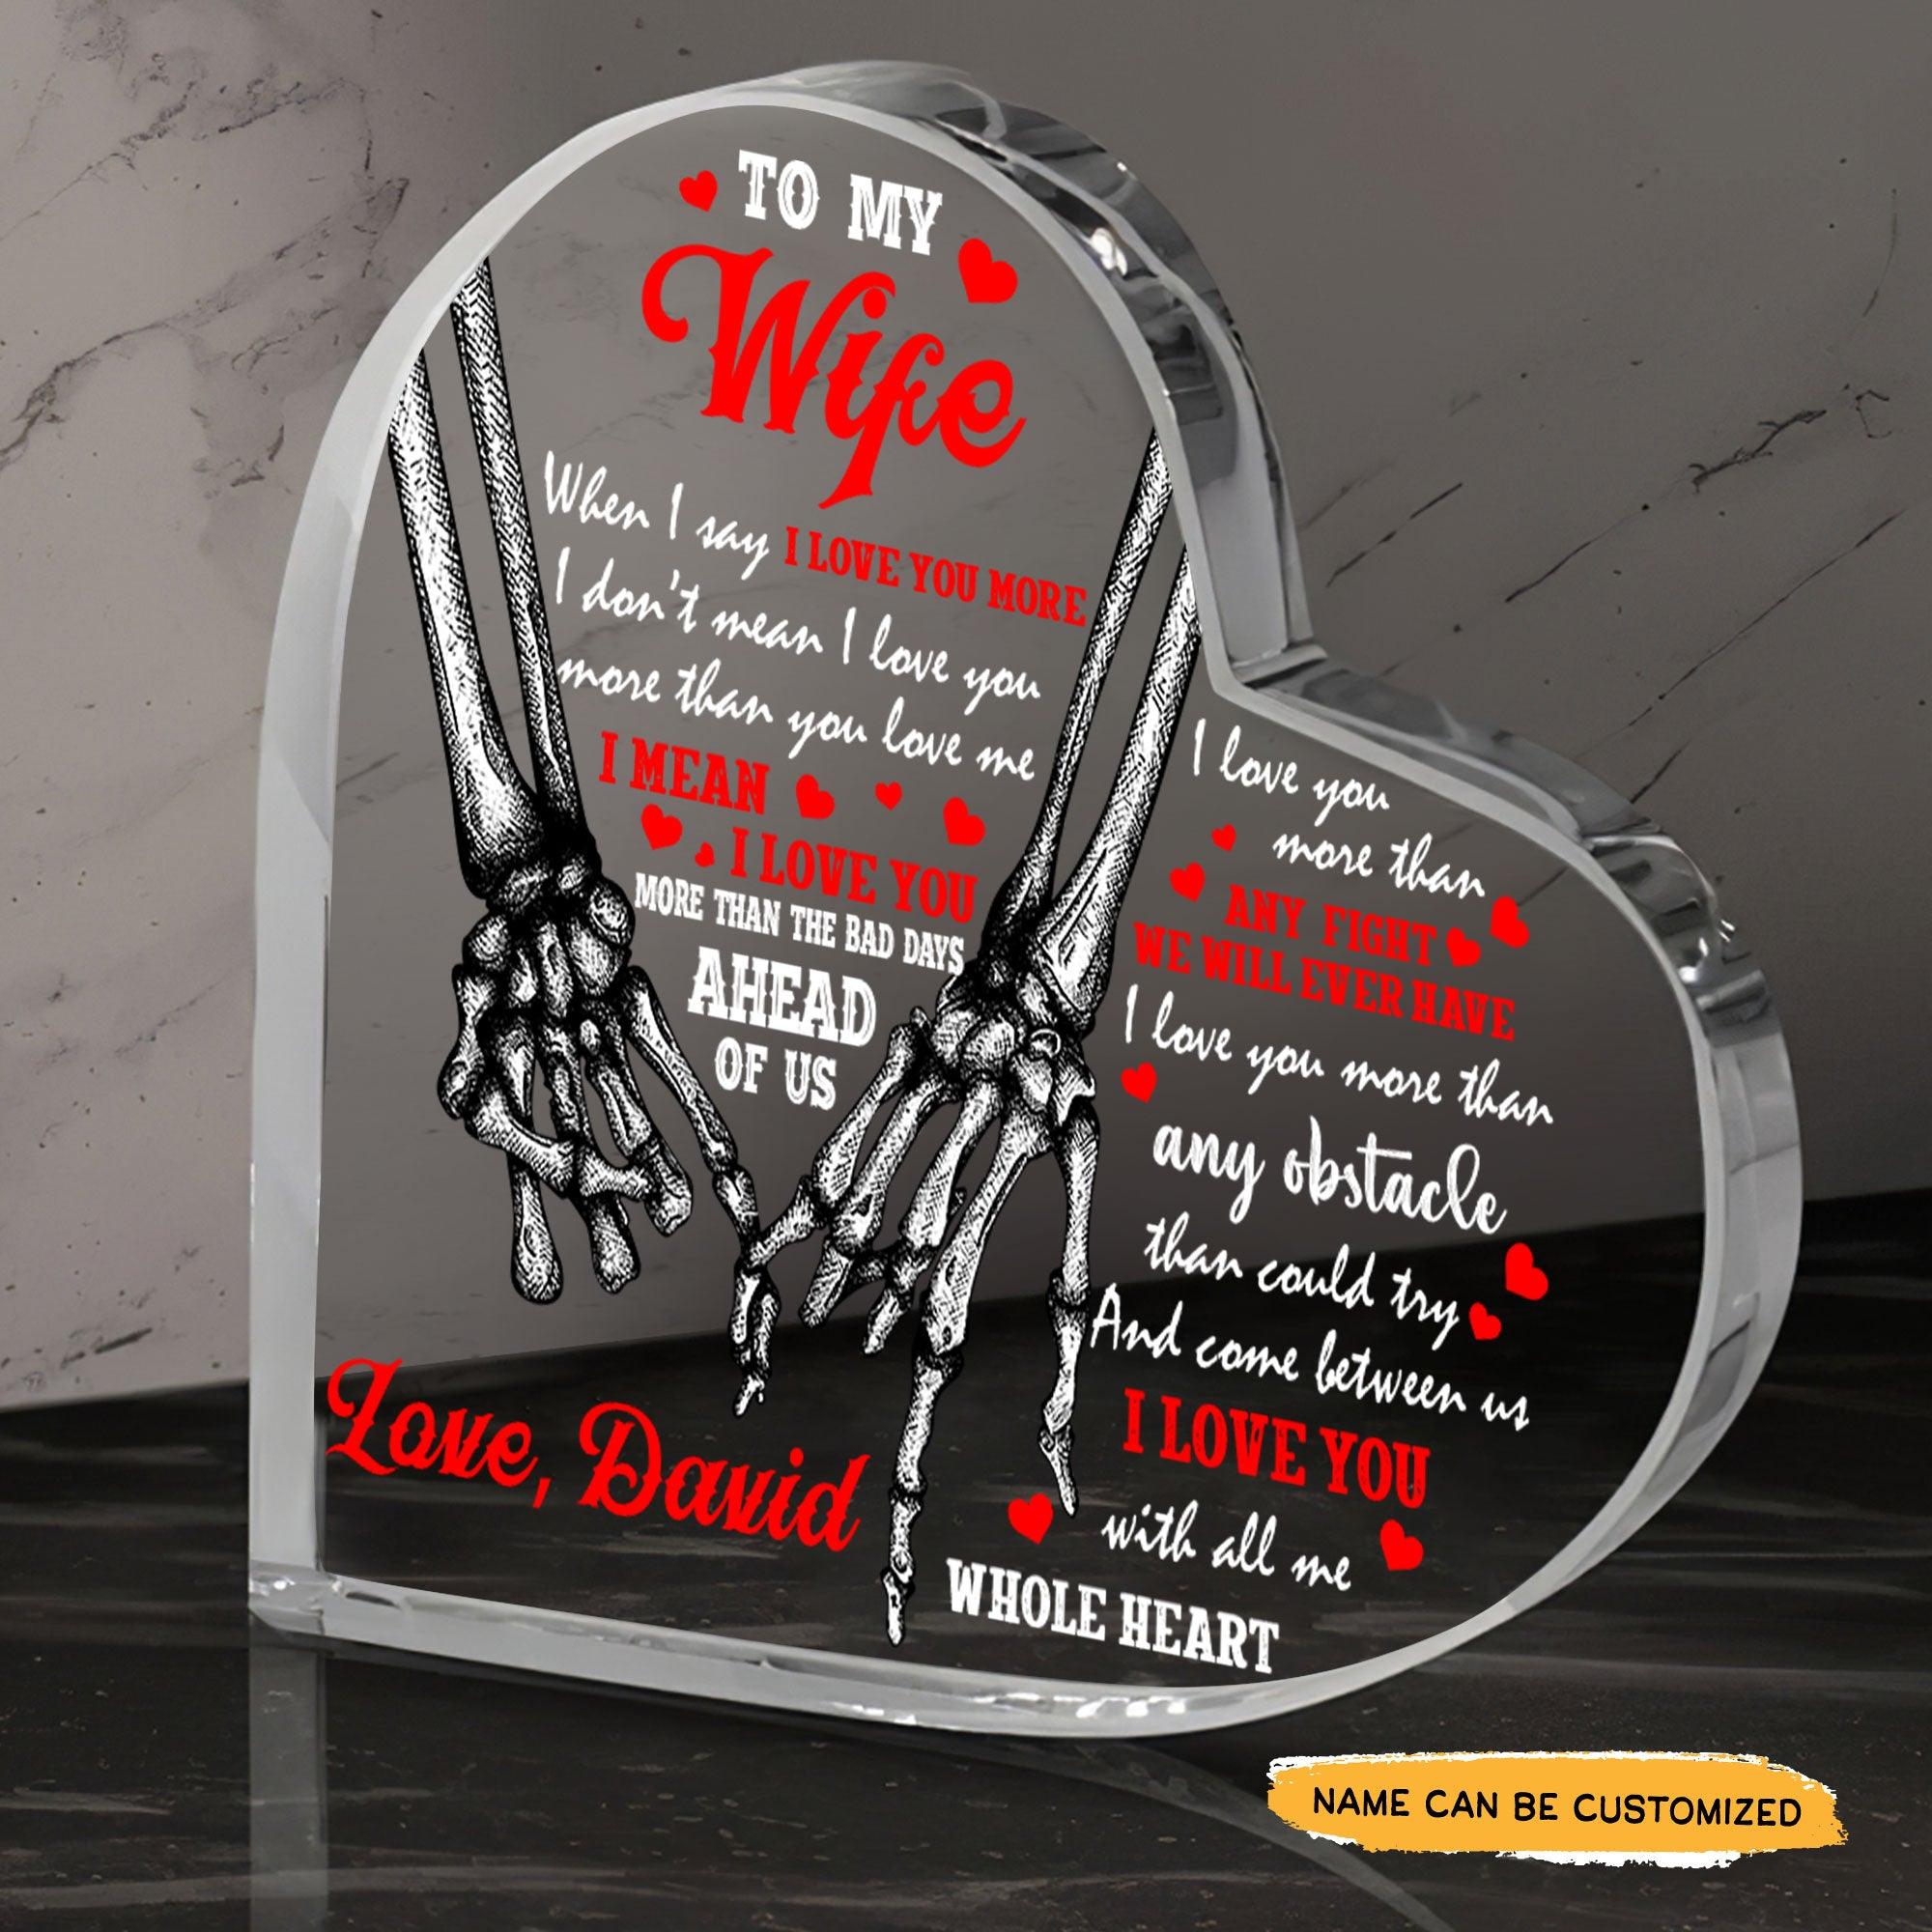 To My Wife - Customized Skull Crystal Heart Gifts - Wonder Skull